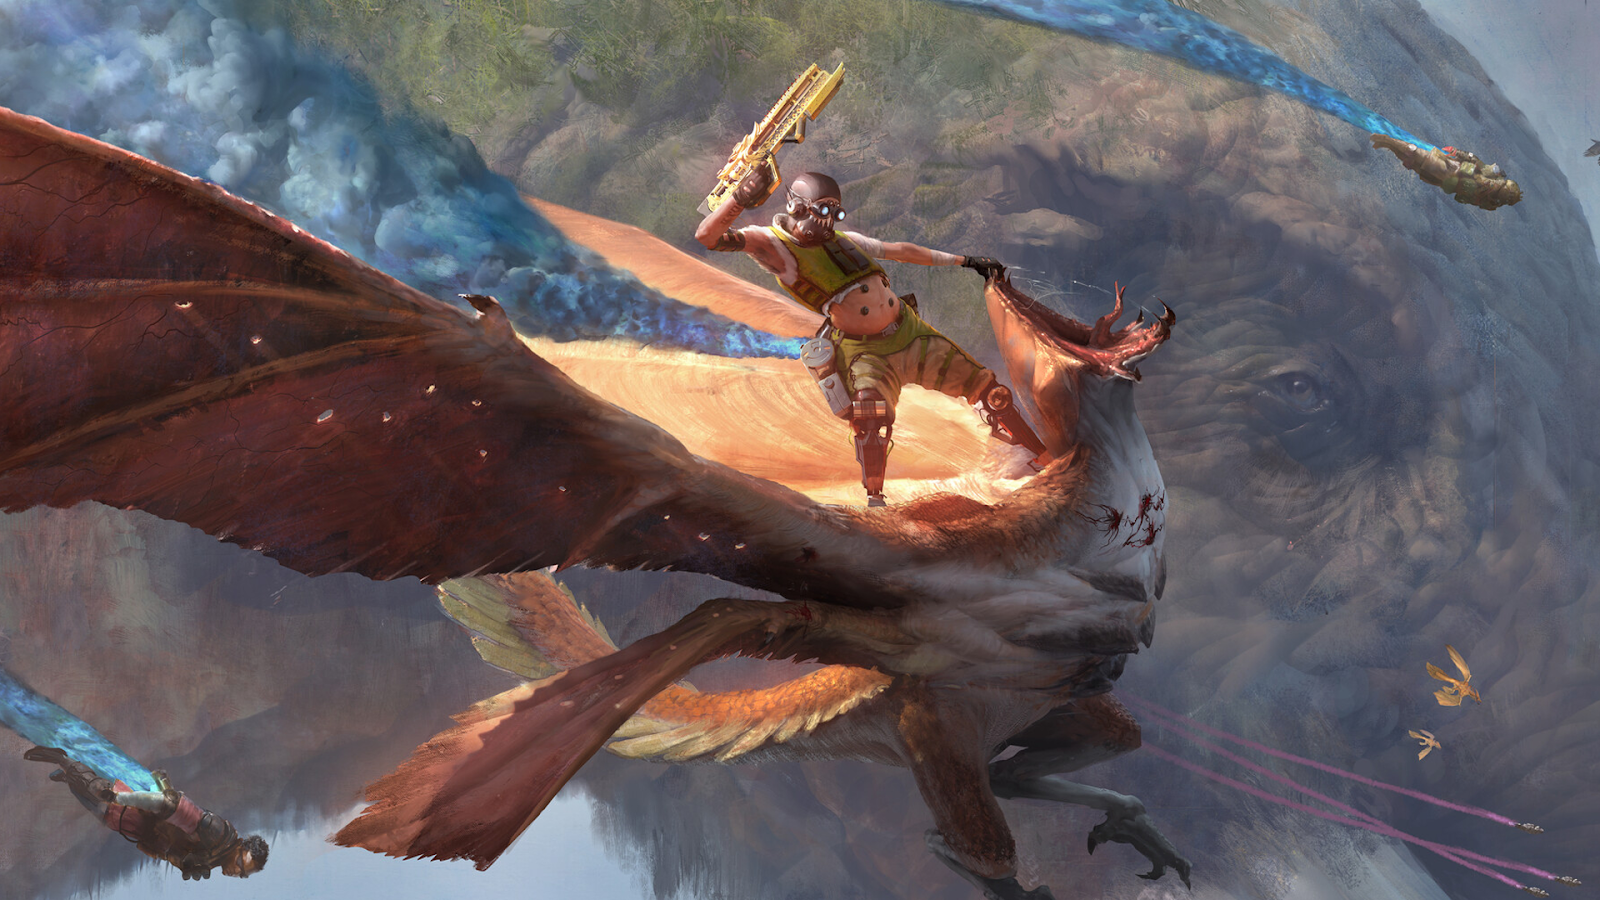 A Woman Is Riding A Dragon With A Sword